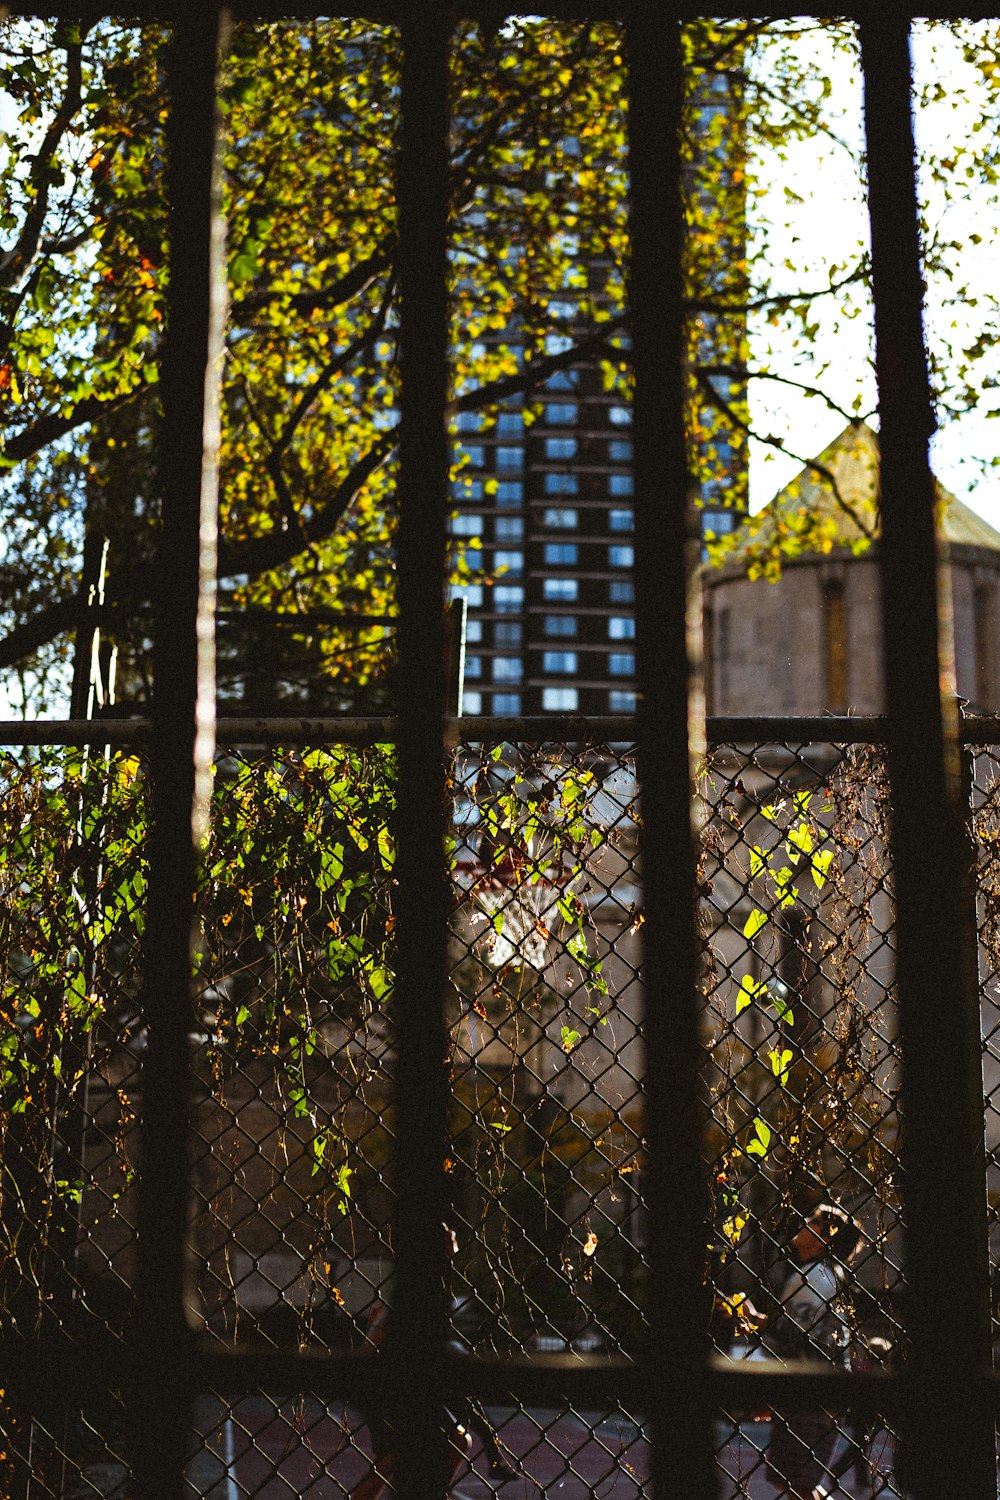 a view of a building through a chain link fence